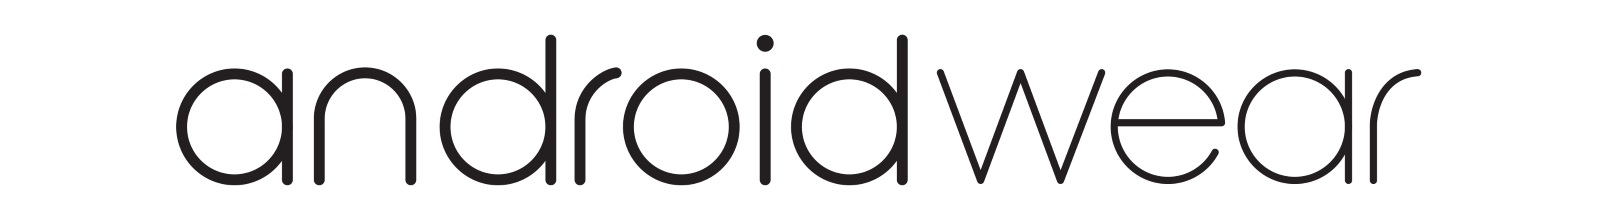 Android_Wear_Logo